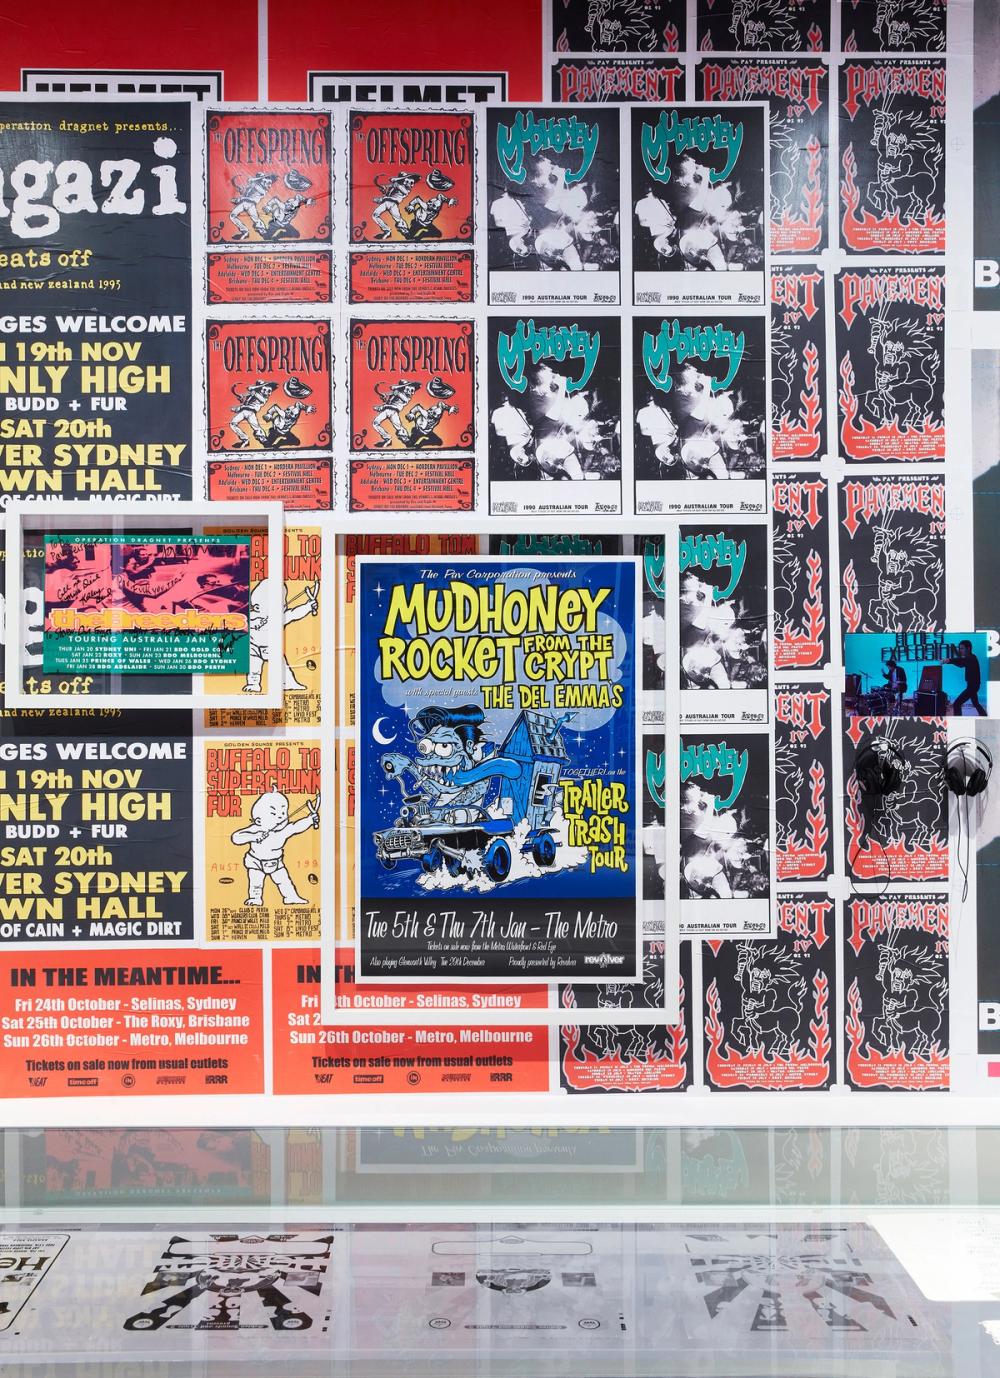 A wall of brightly coloured band posters. The poster in the middle is blue and has the band name ‘Mudhoney’ on it.